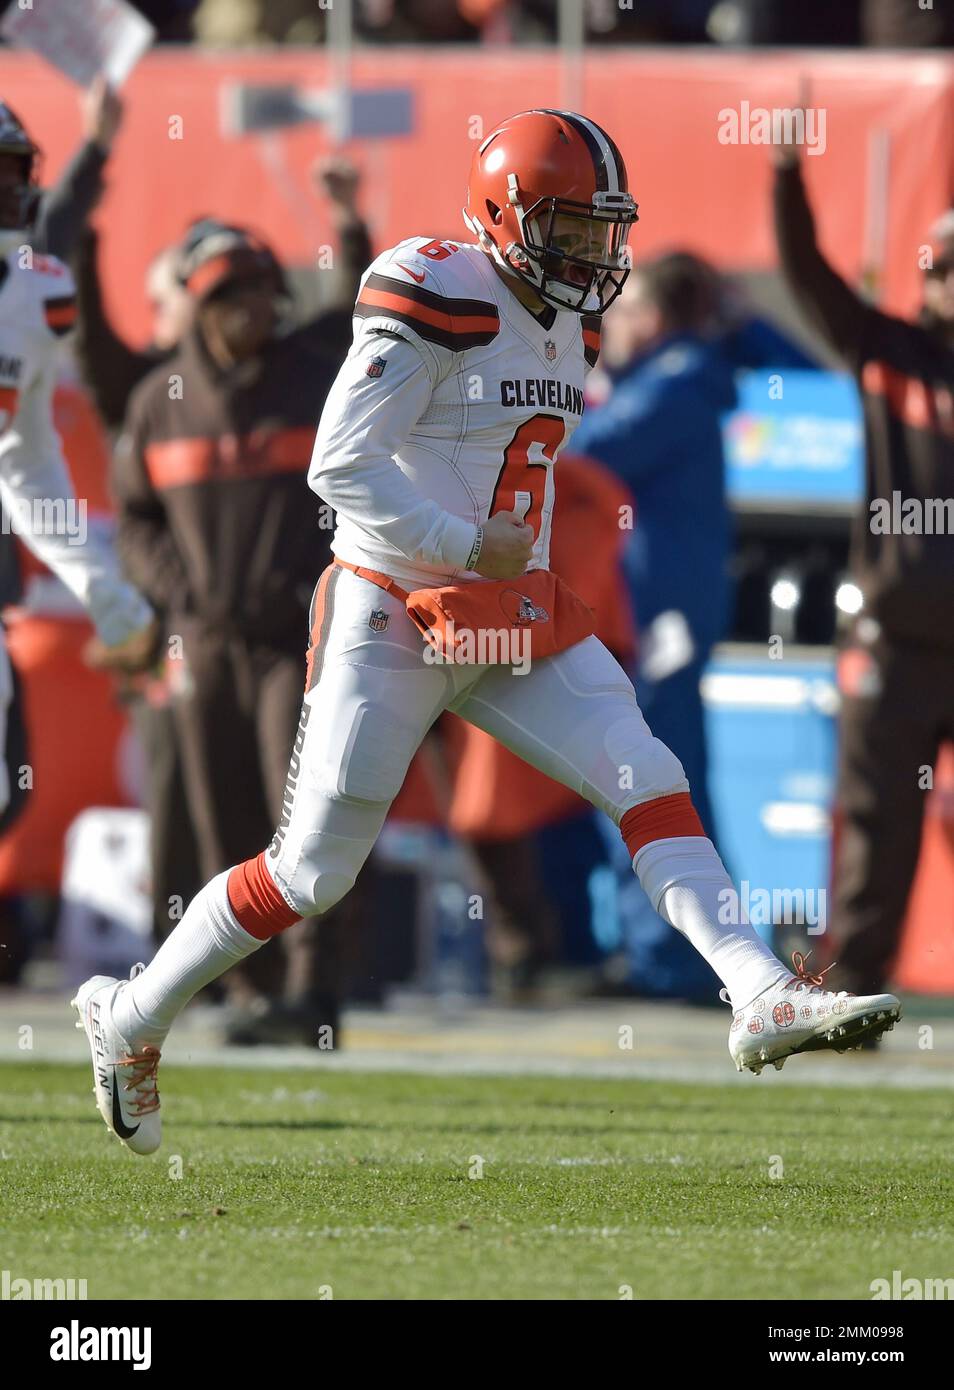 Cleveland Browns quarterback Baker Mayfield (6) celebrates after throwing a 51-yard touchdown during the first half of an NFL football game against the Carolina Panthers, Sunday, Dec. 9, 2018, in Cleveland. (AP Photo/David Richard) Stock Photo